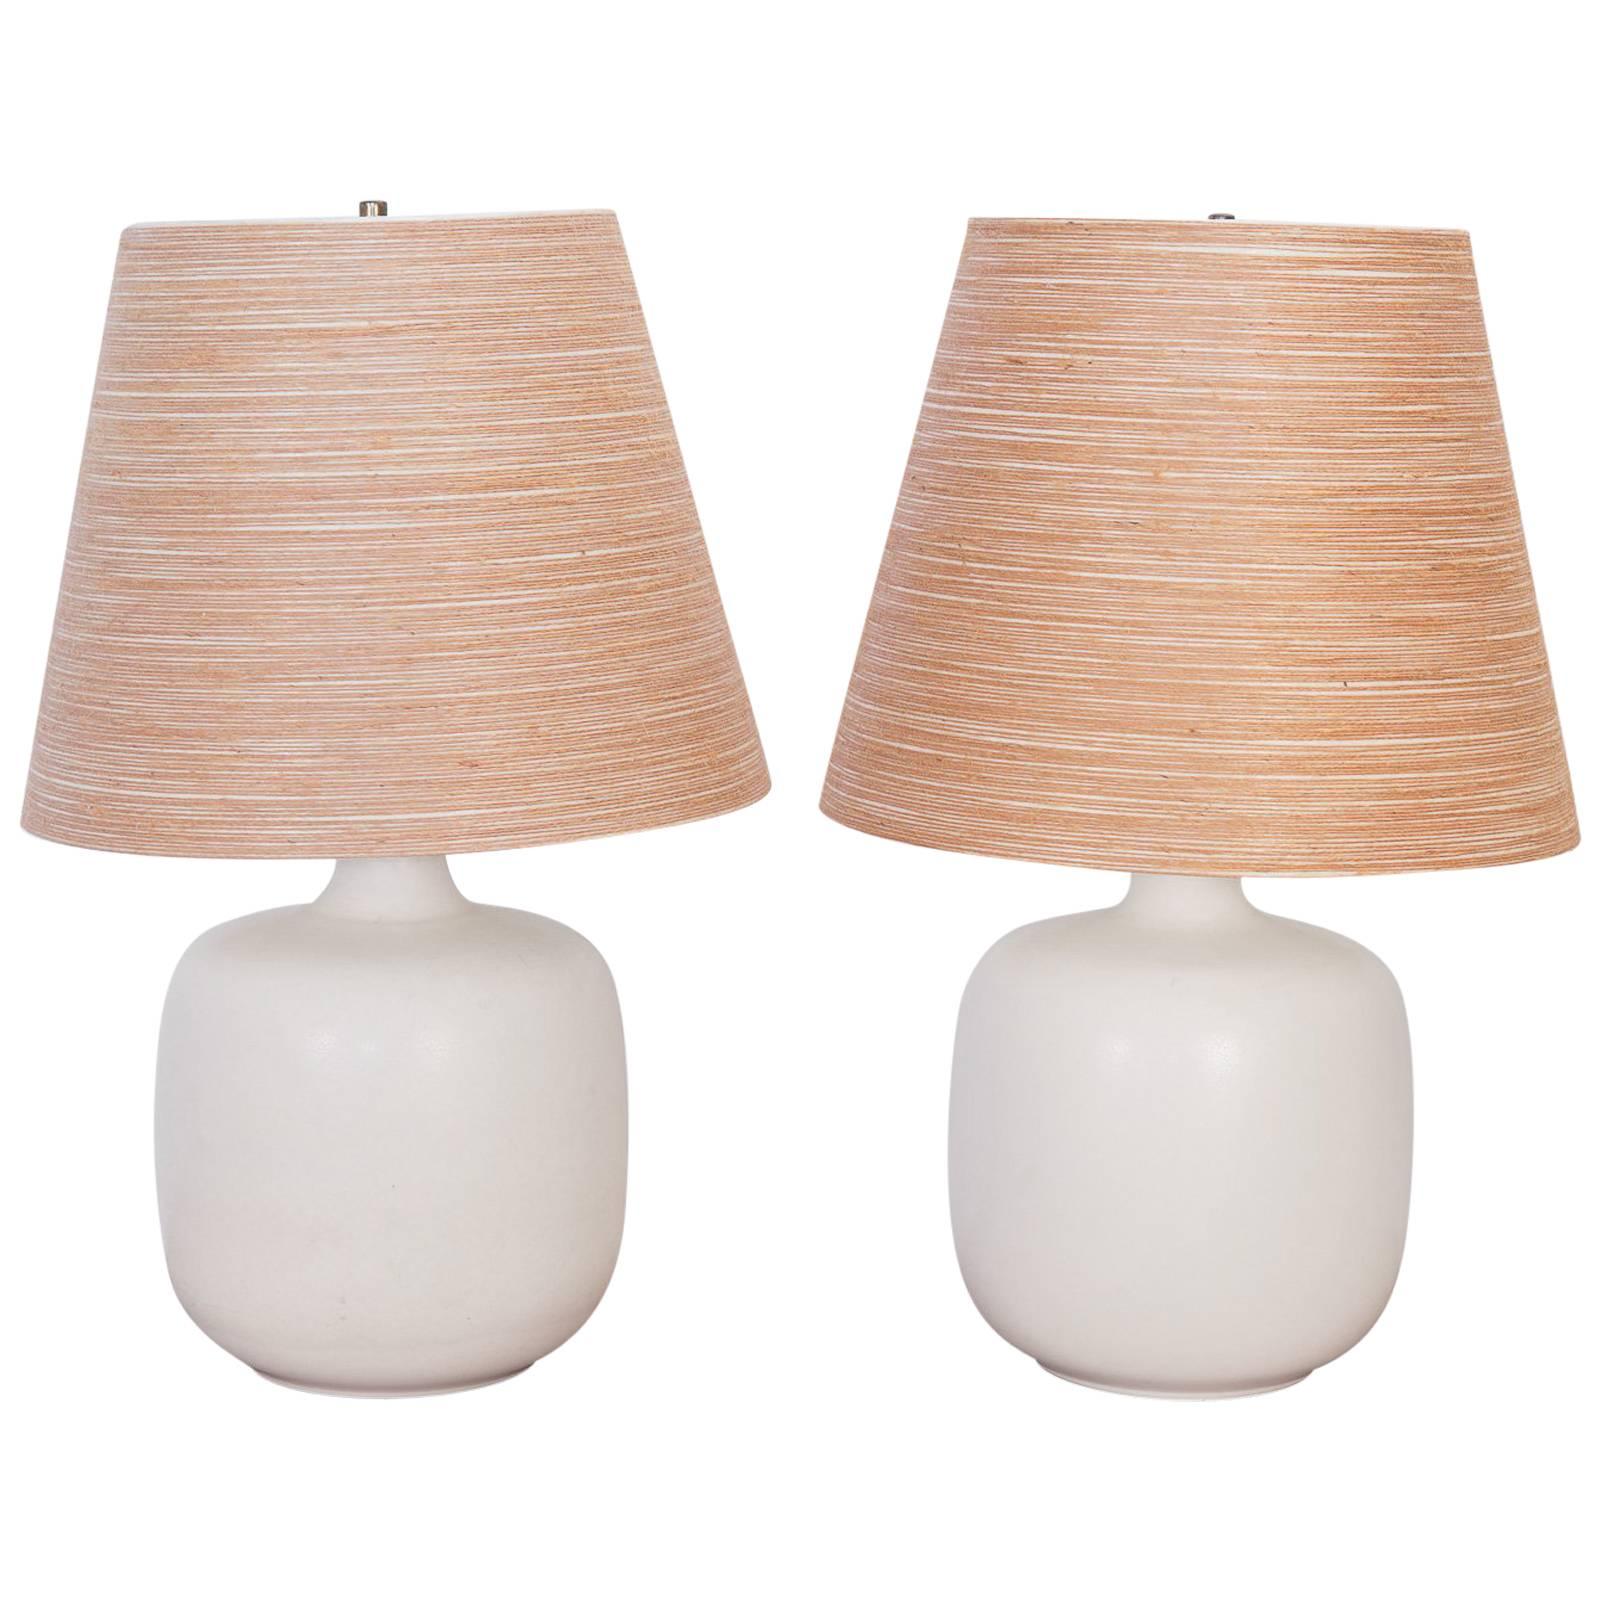 Pair of Lotte Table Lamps with Jute Shades